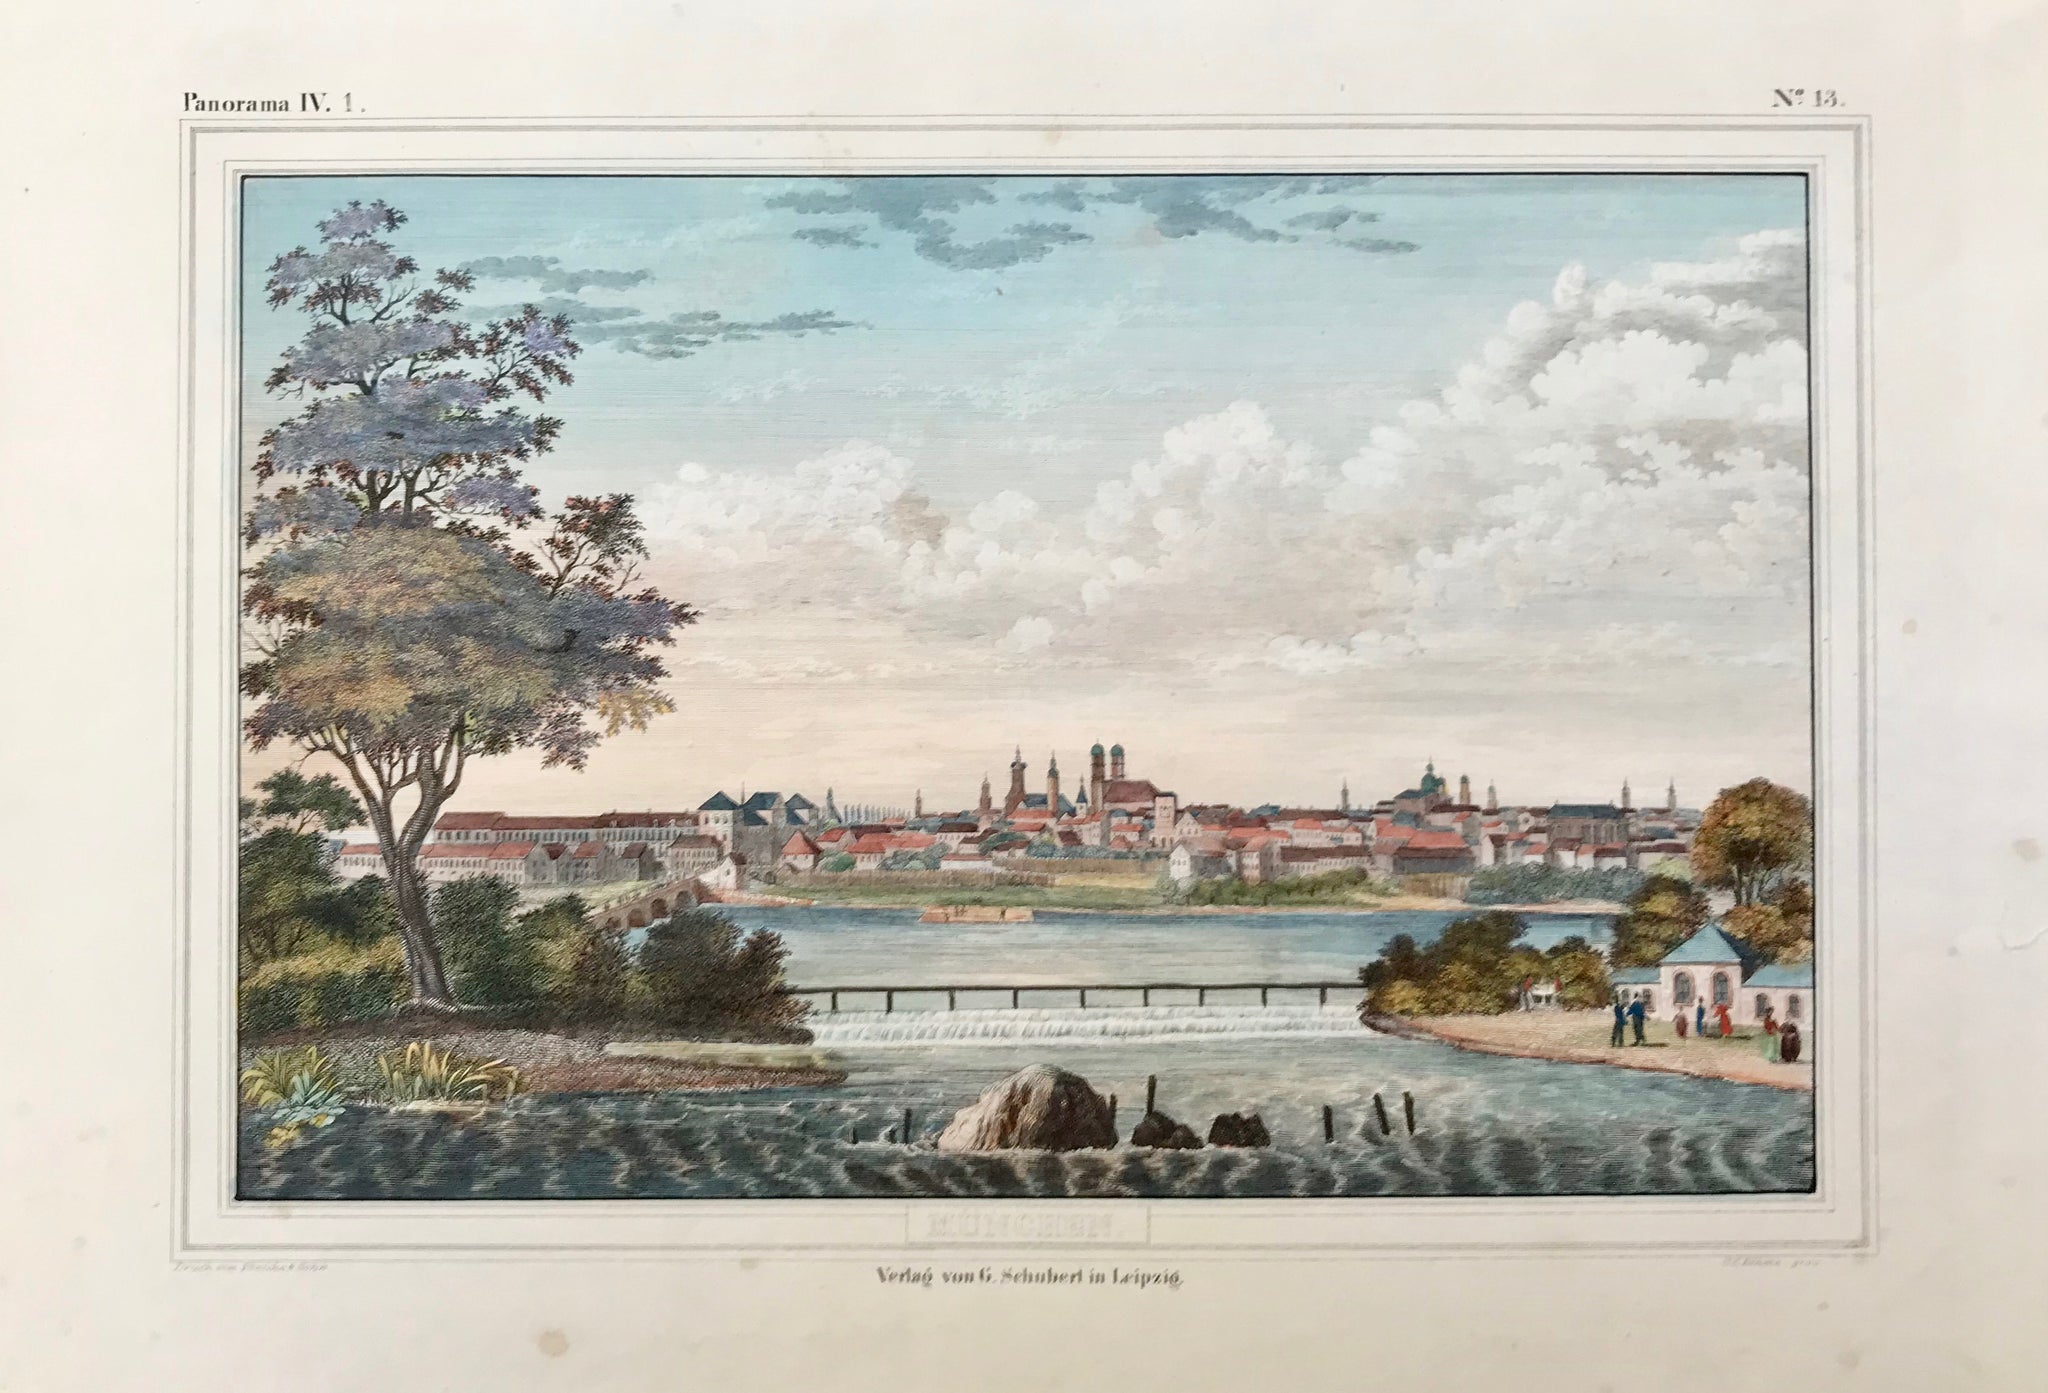    "Muenchen" Munich. General panoramic view across the Isar River. In the foreground: Wehrsteig leading to Praterinsel.  Copper etching by C. C. Böhme in very fine hand-coloring, heightened with eggwhite.  Printed by Poenicke & son. Published by G. Schubert in Leipzig RARE!